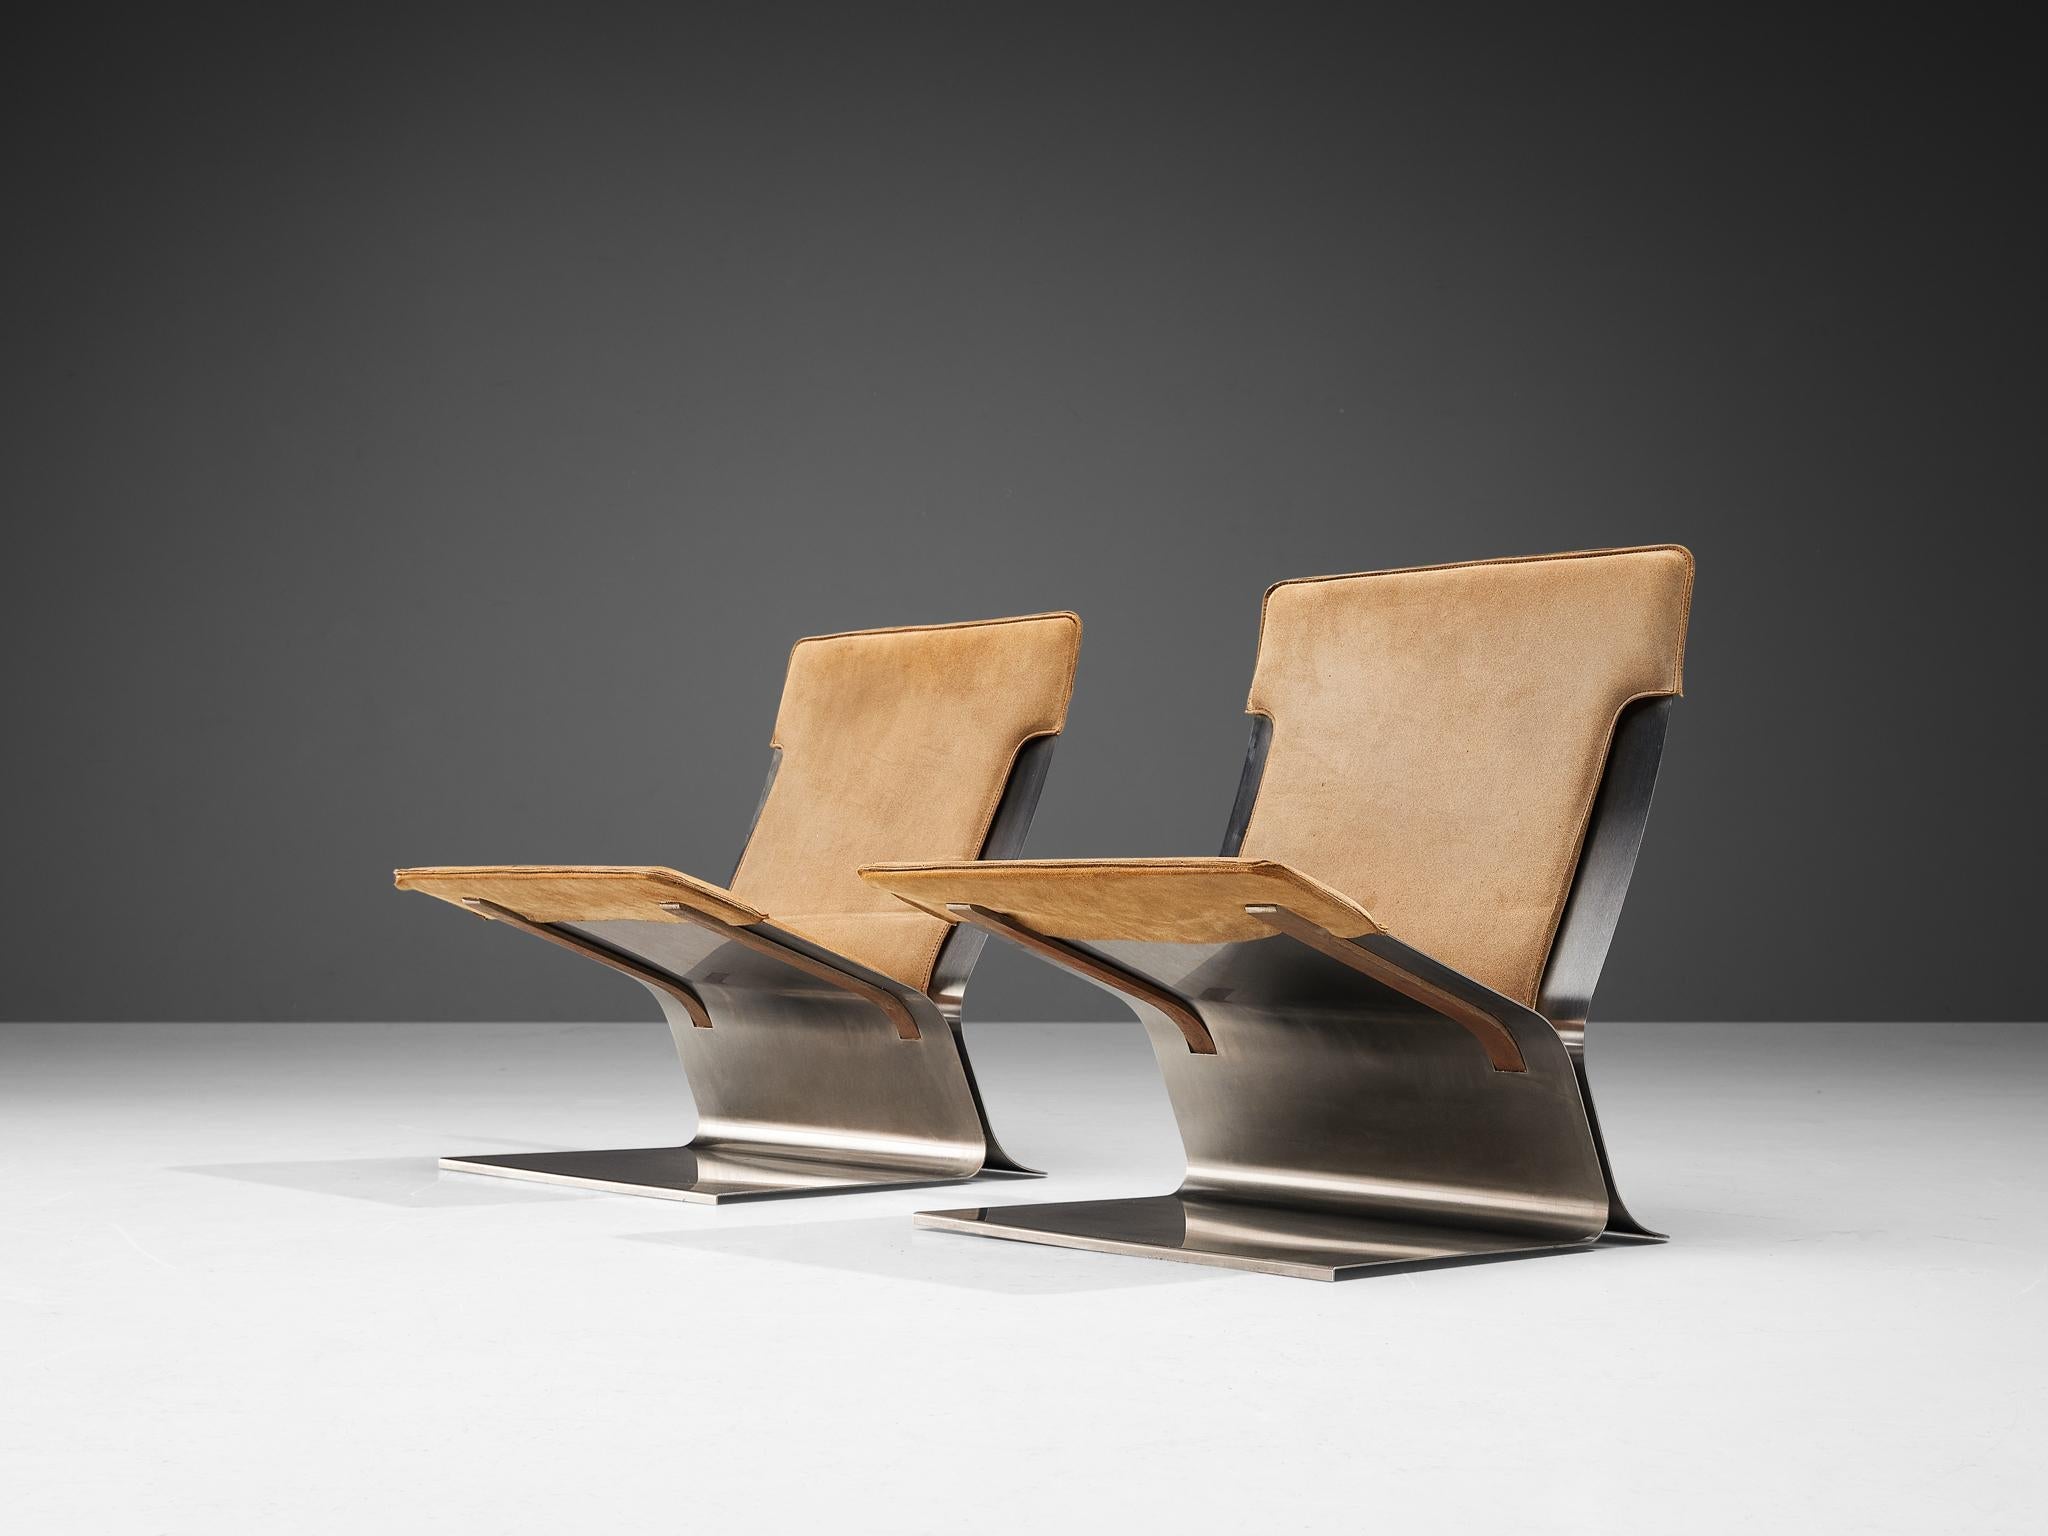 Pierre Folie for Jacques Charpentier 'Chauffeuse' Pair of Lounge Chairs